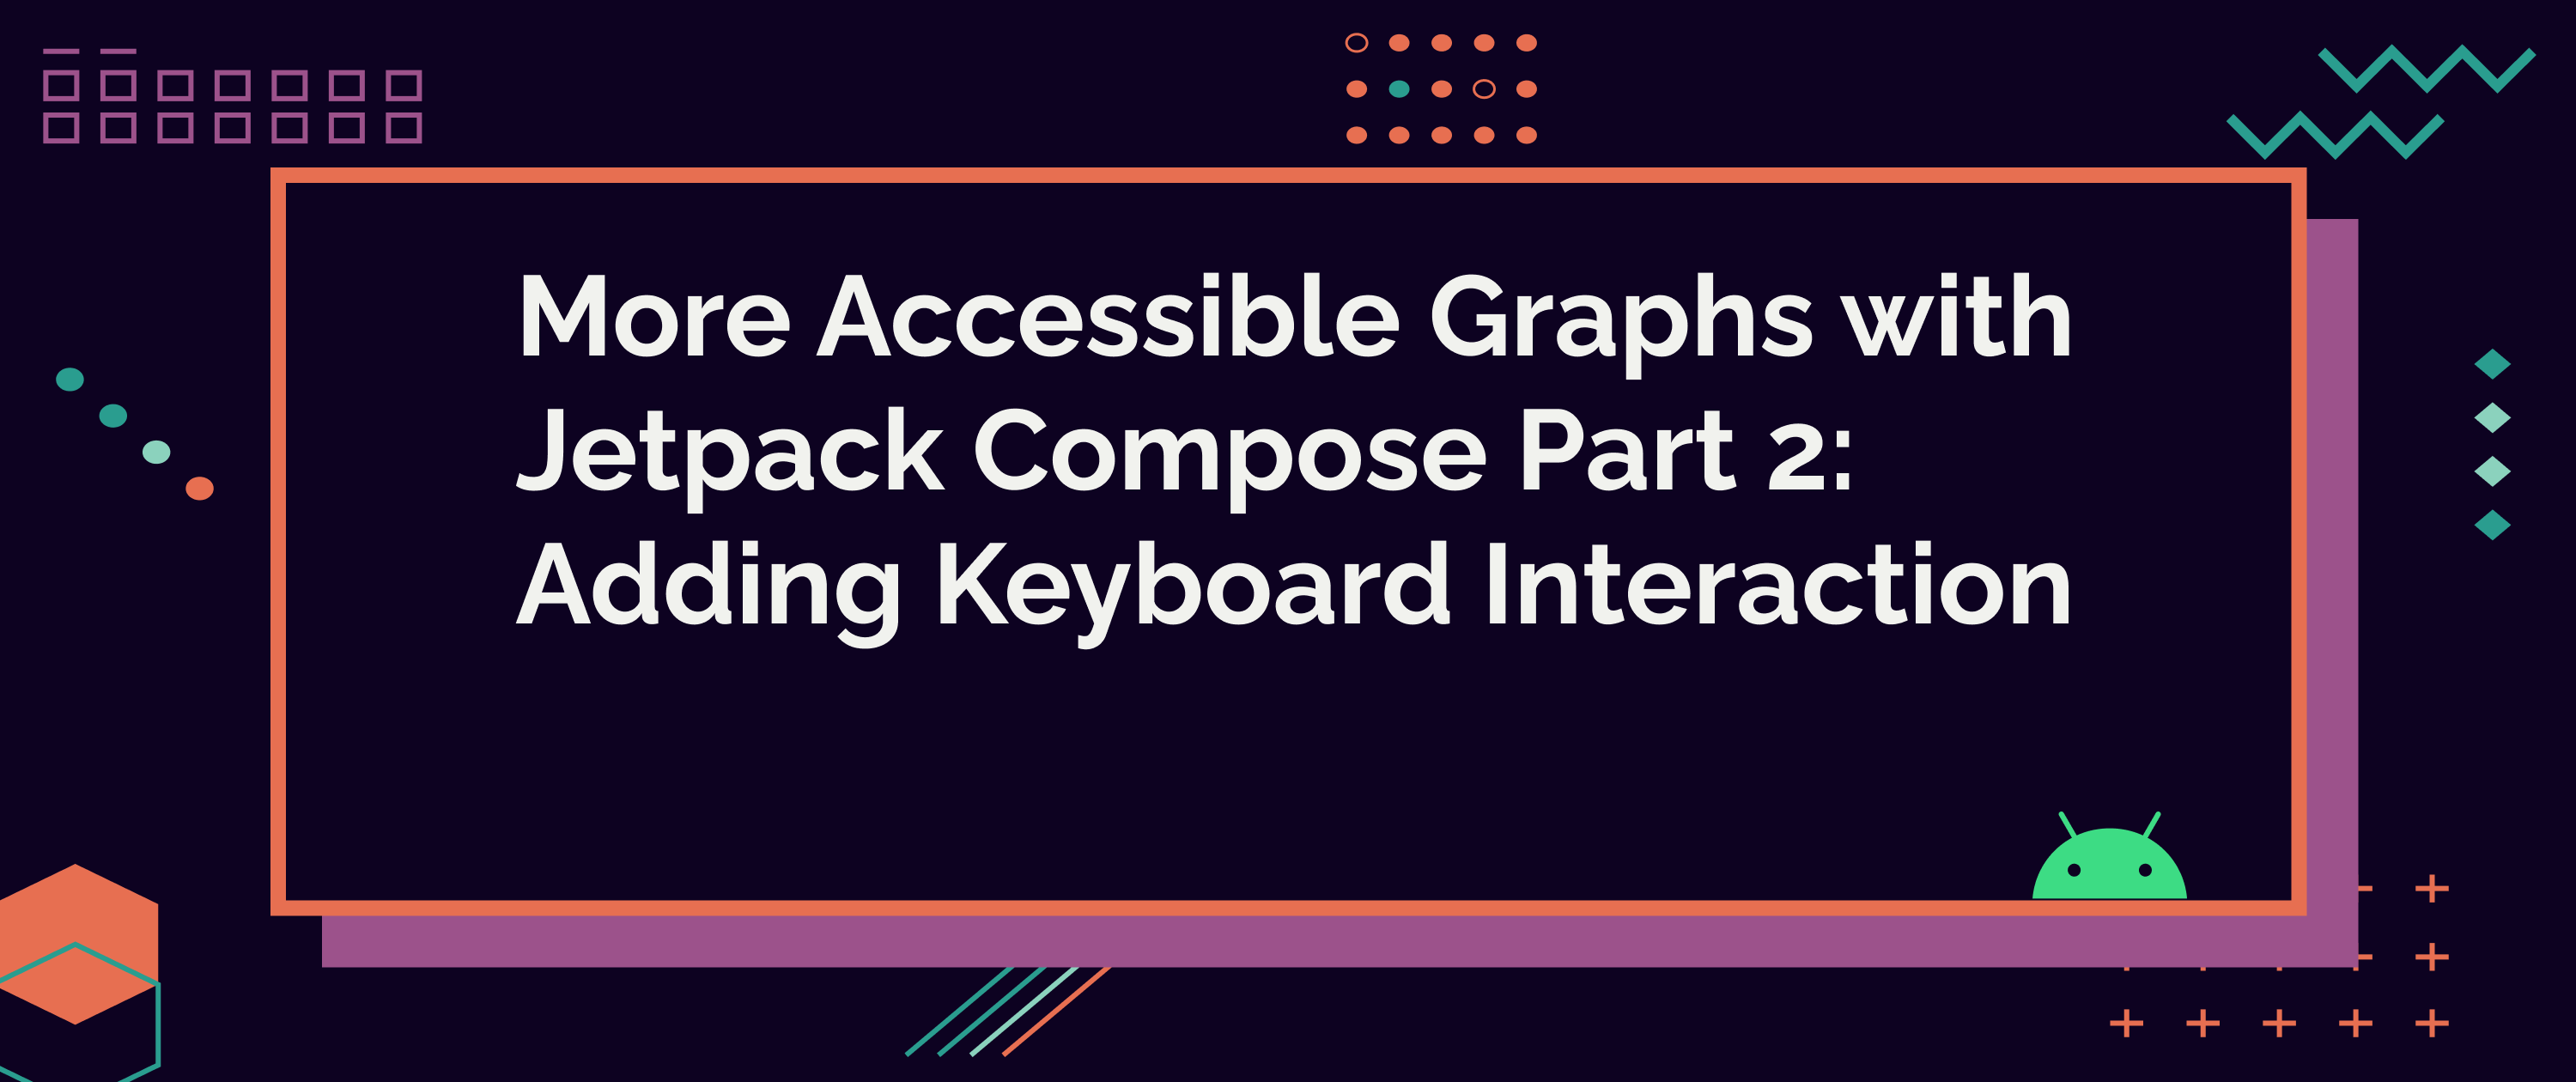 More Accessible Graphs with Jetpack Compose Part 2: Adding Keyboard Interaction